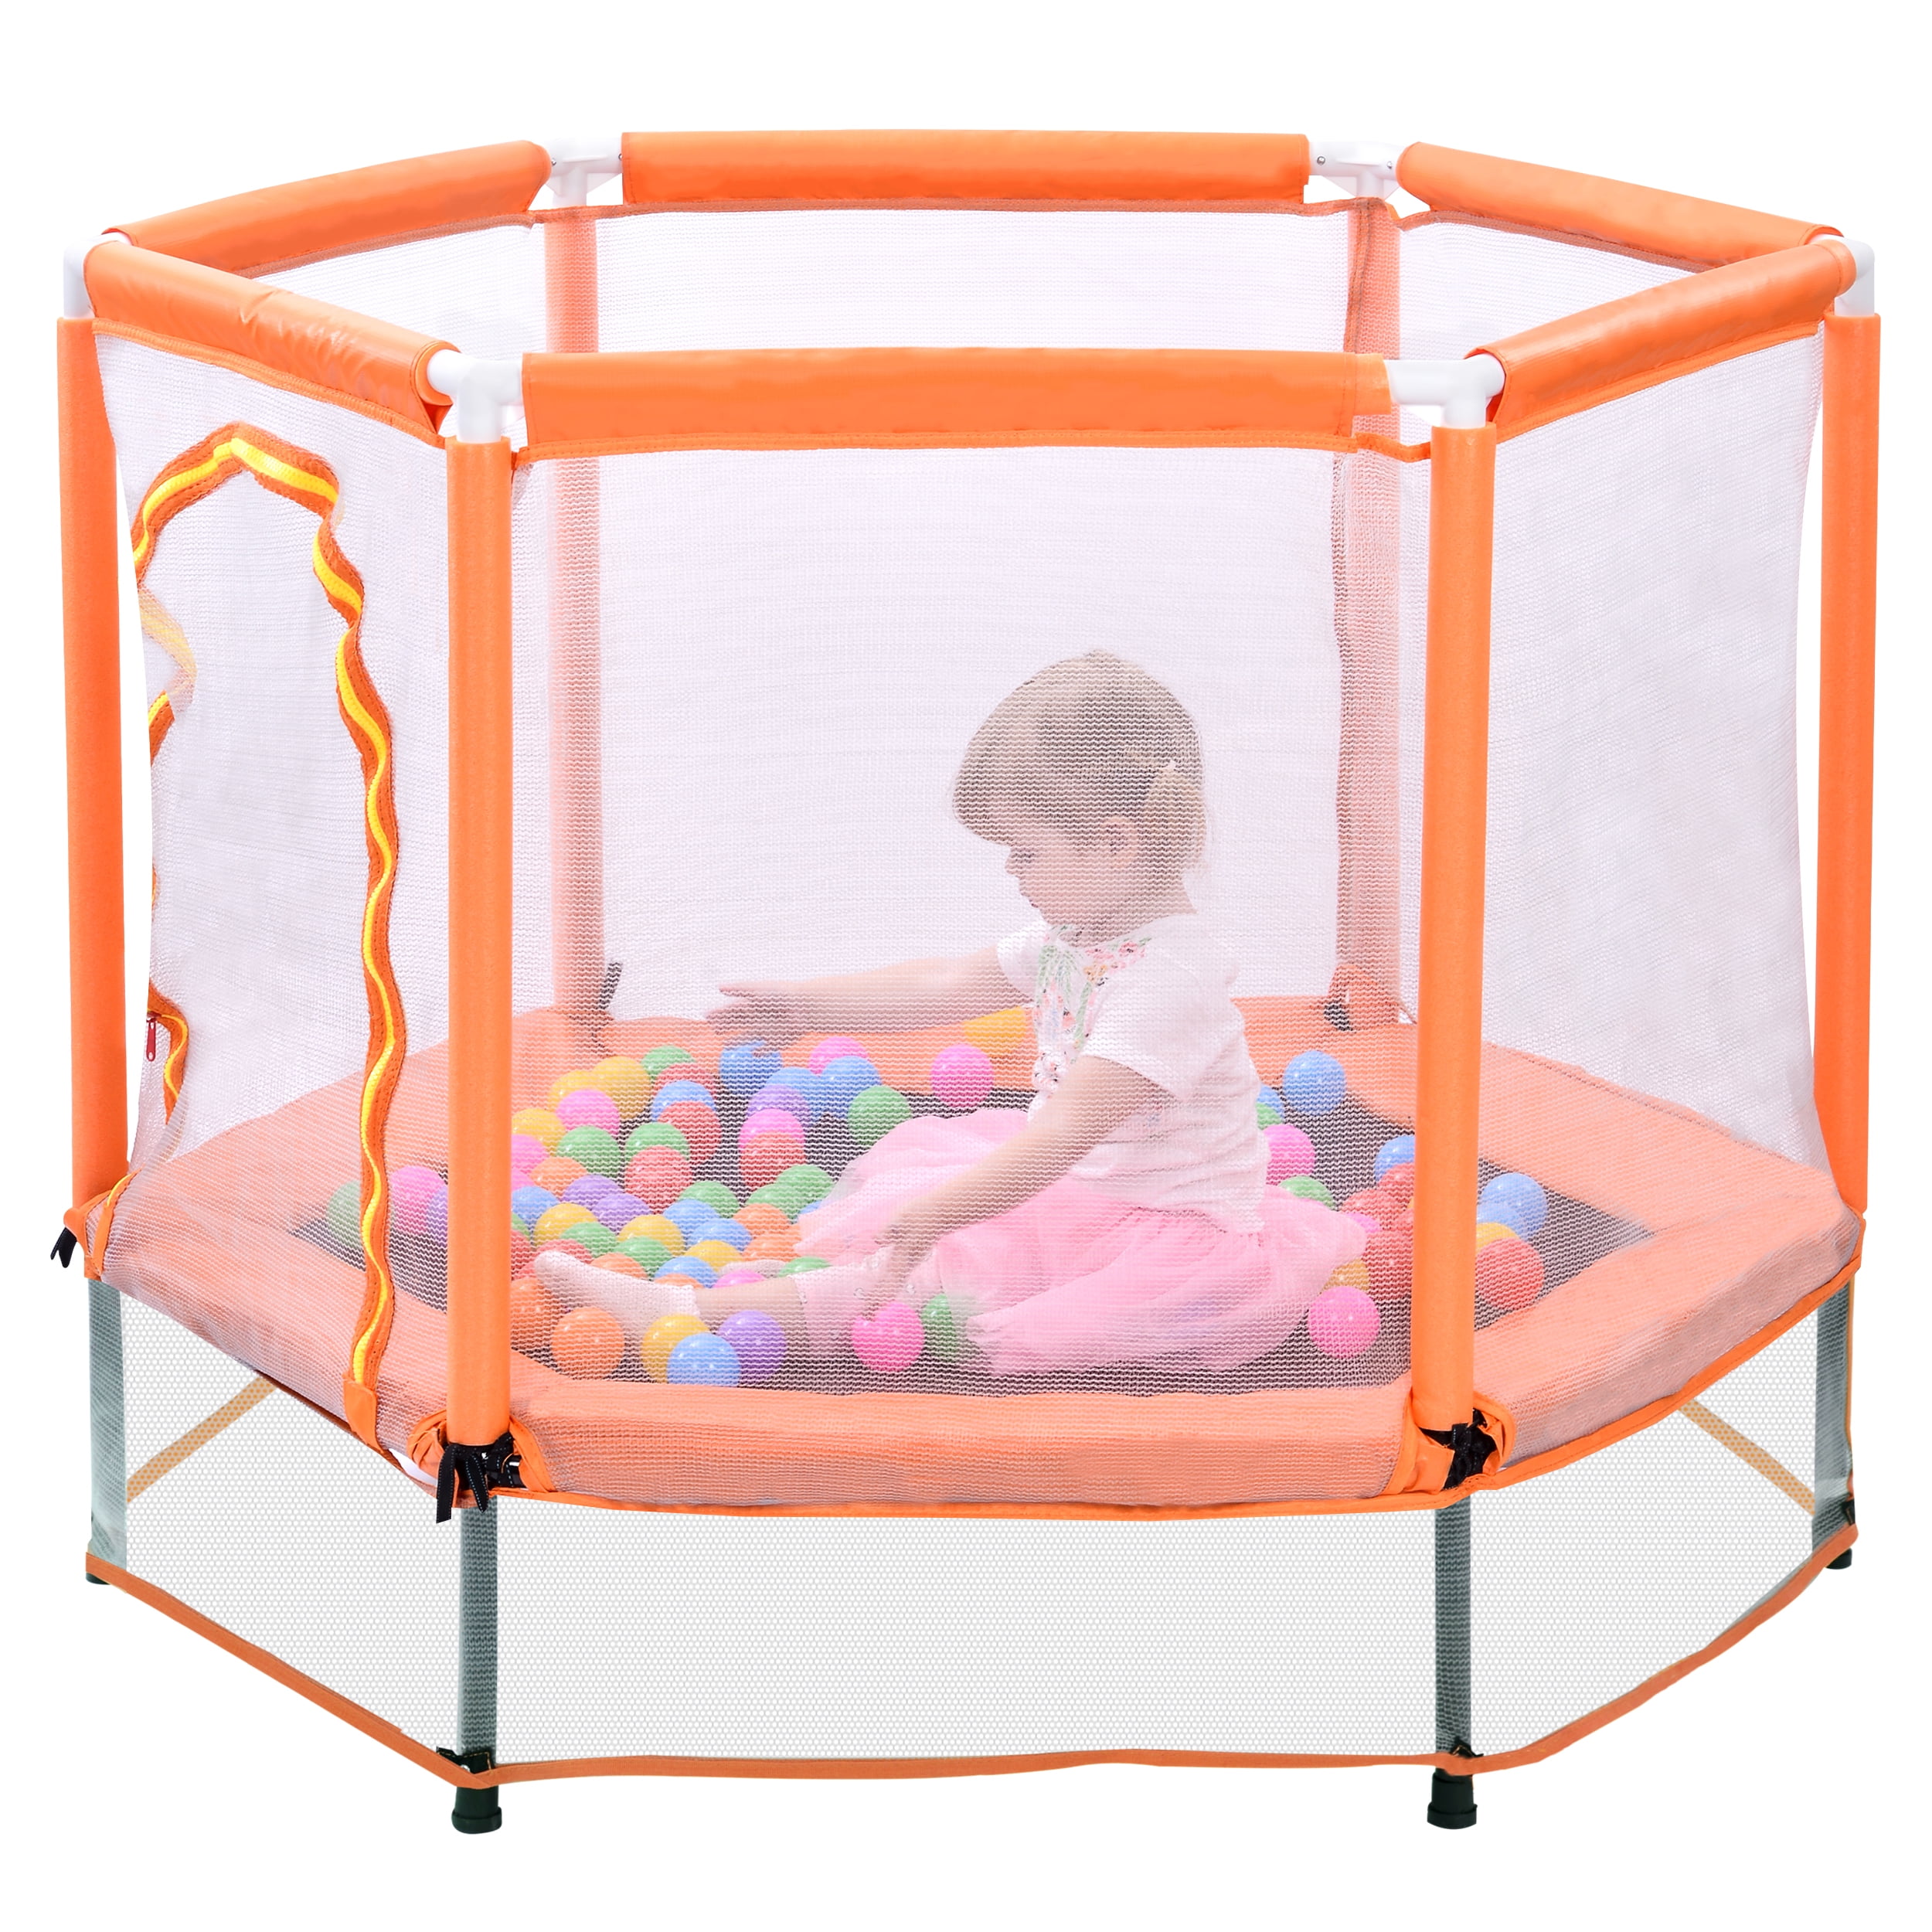 Indoor Outdoor Trampoline for Boys Grils Children Toddler Durable Fitness Trampoline 1.4m/55inch Colorful Trampoline with Safety Net,Seaballs,Basketball Hoop Kids Trampoline with Enclosure Net 